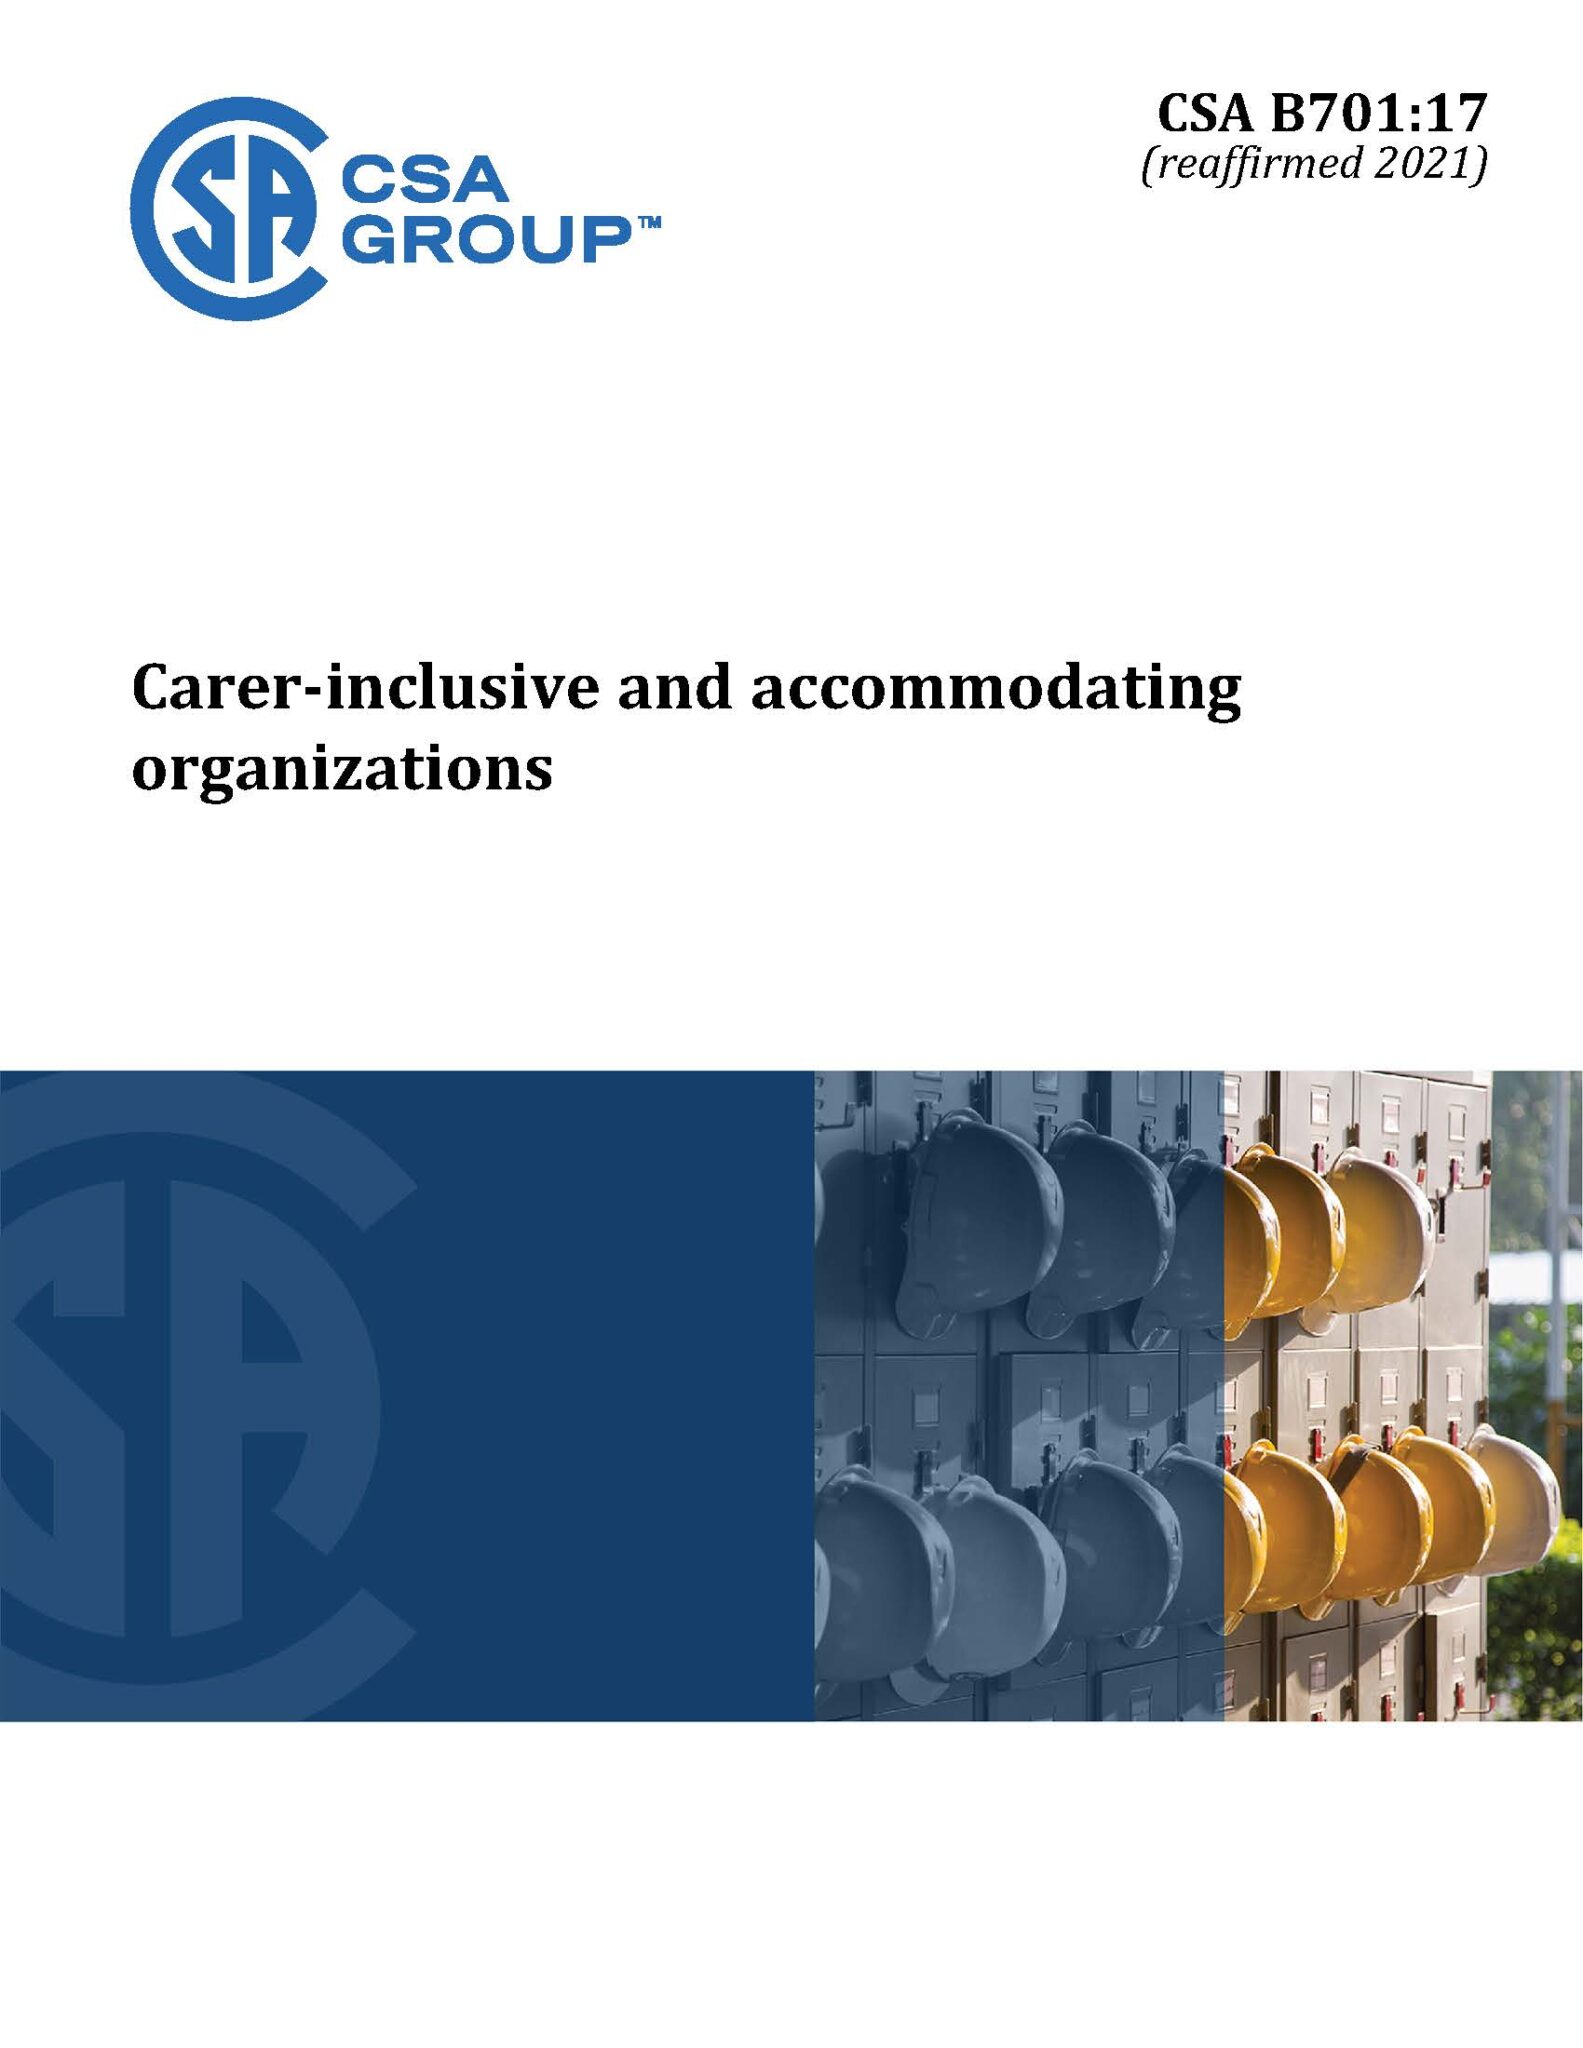 B701-17 - Carer-inclusive and accommodating organizations